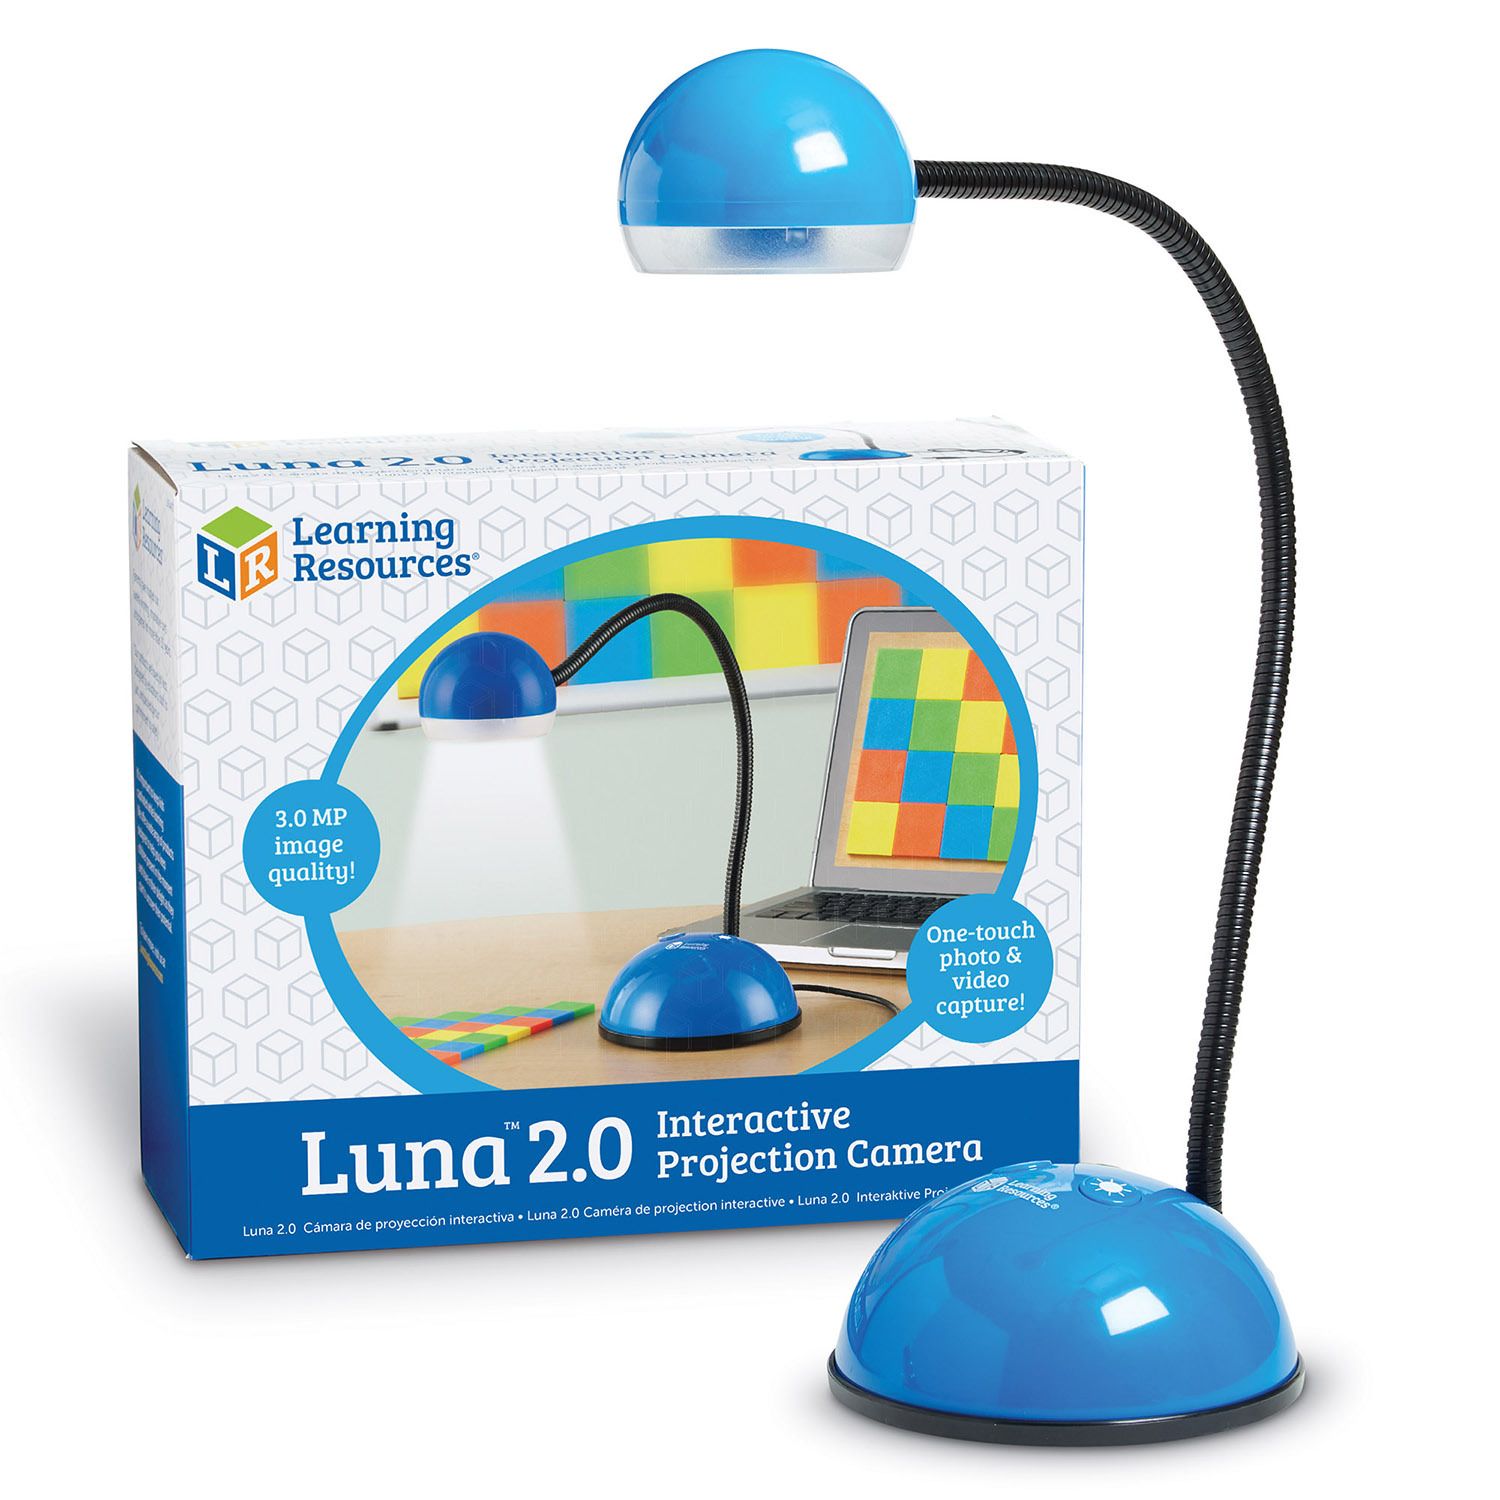 Image for Learning Resources Luna 2.0 Interactive Projection Camera at Kohl's.